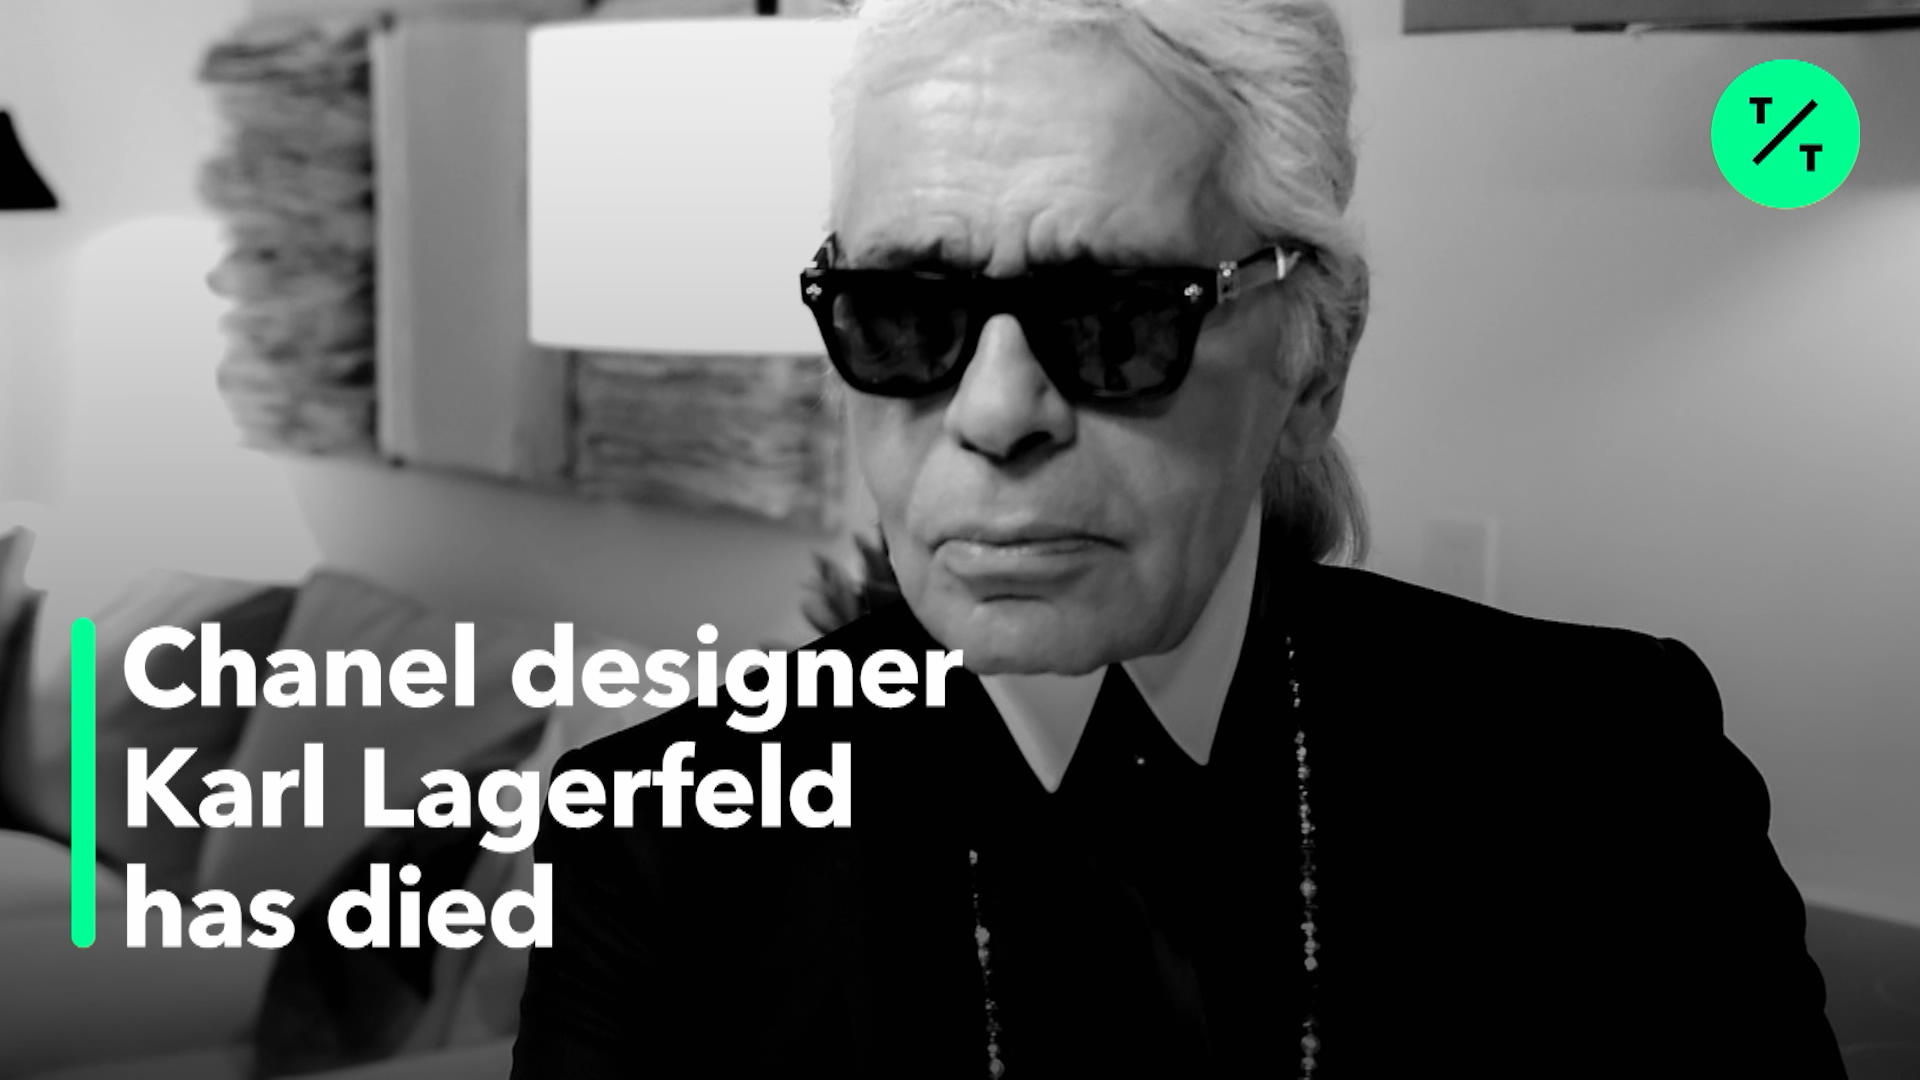 karl lagerfeld and coco chanel earrings